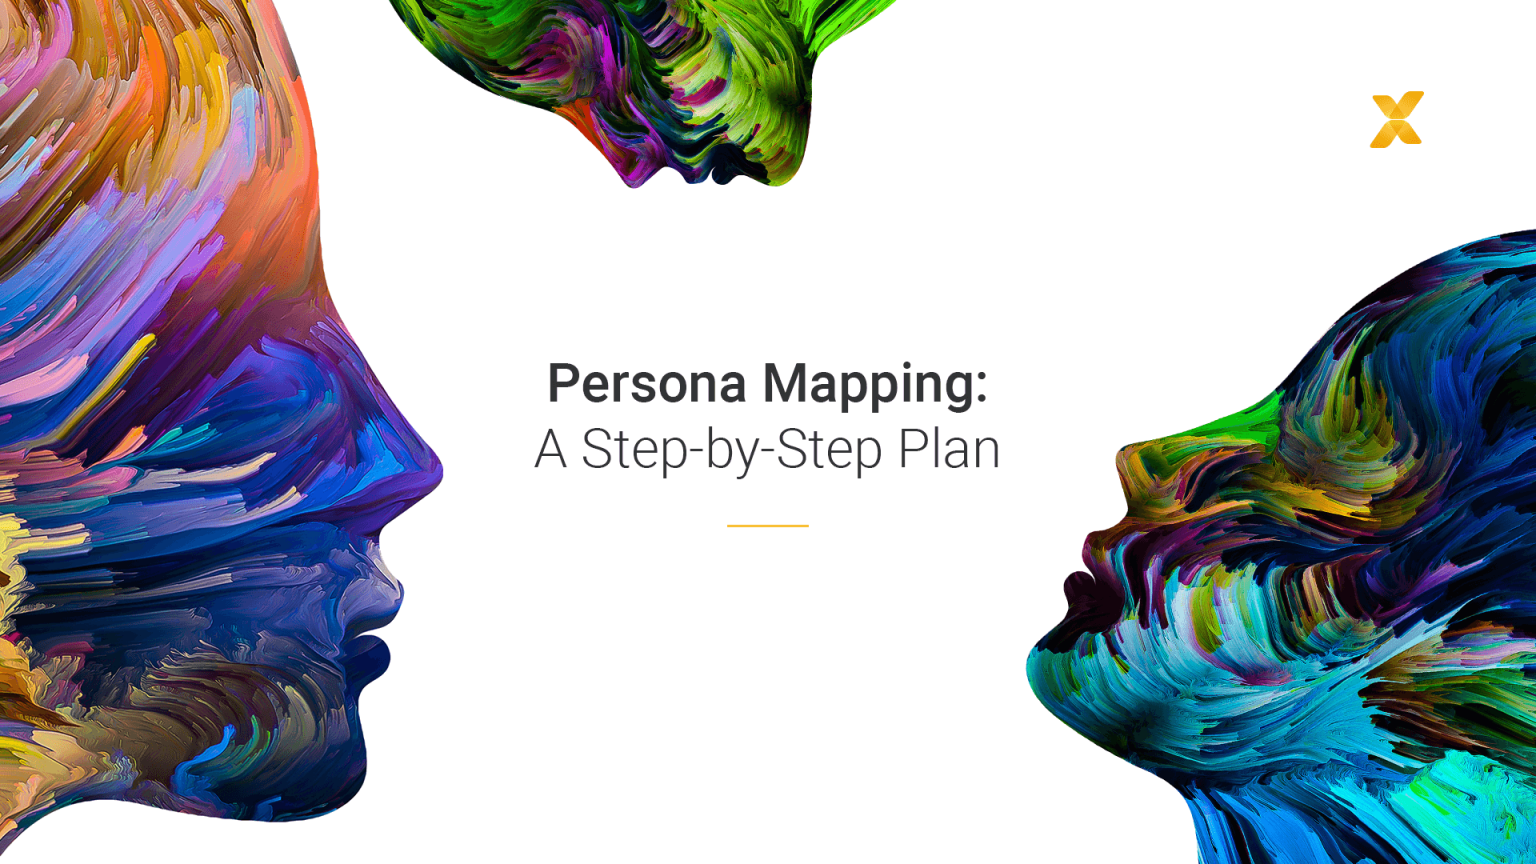 Persona Mapping 1920x1080 1 1536x864 